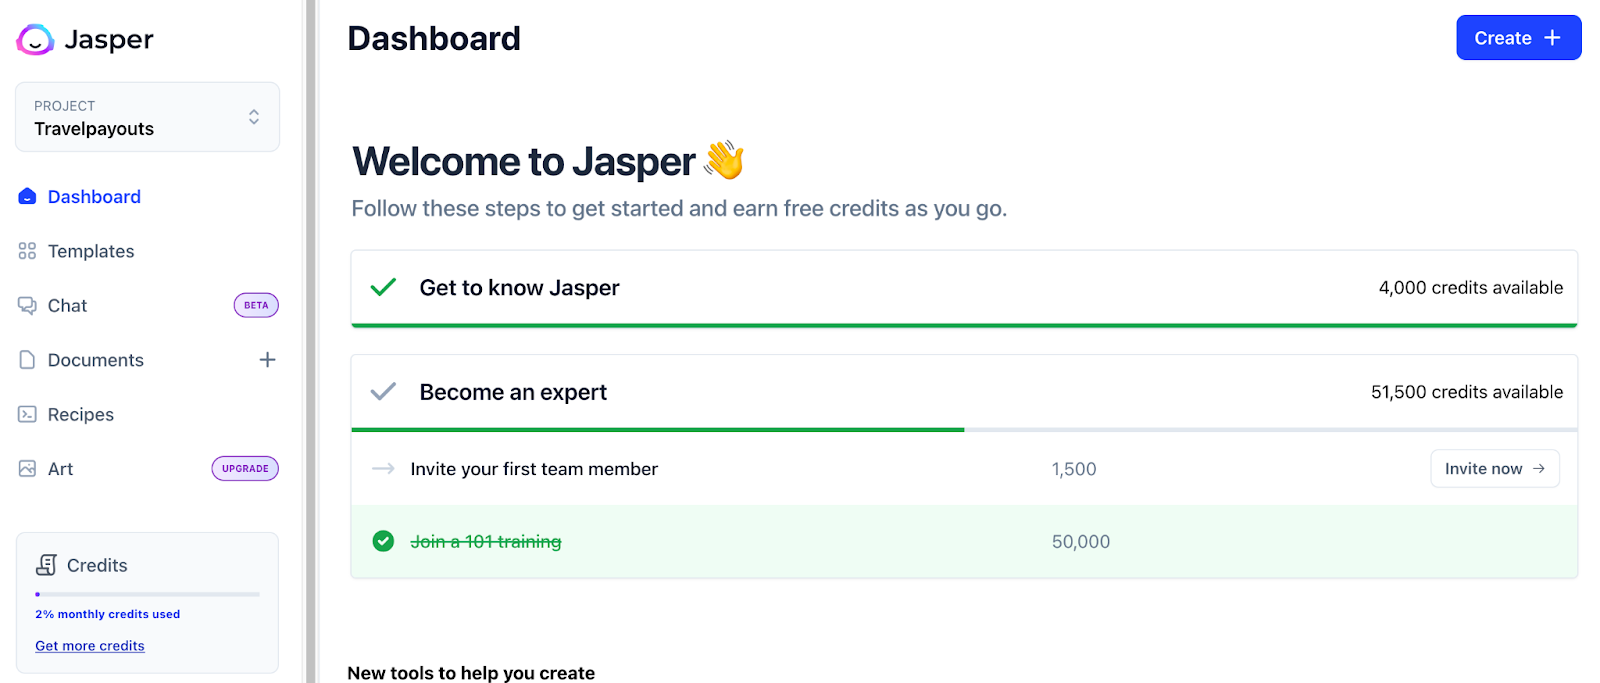 The image displays the user interface and dashboard for Jasper subscribers. The webpage says Welcome to Jasper while offering a menu to navigate the tool, including templates, chat, documents, recipes, and art.